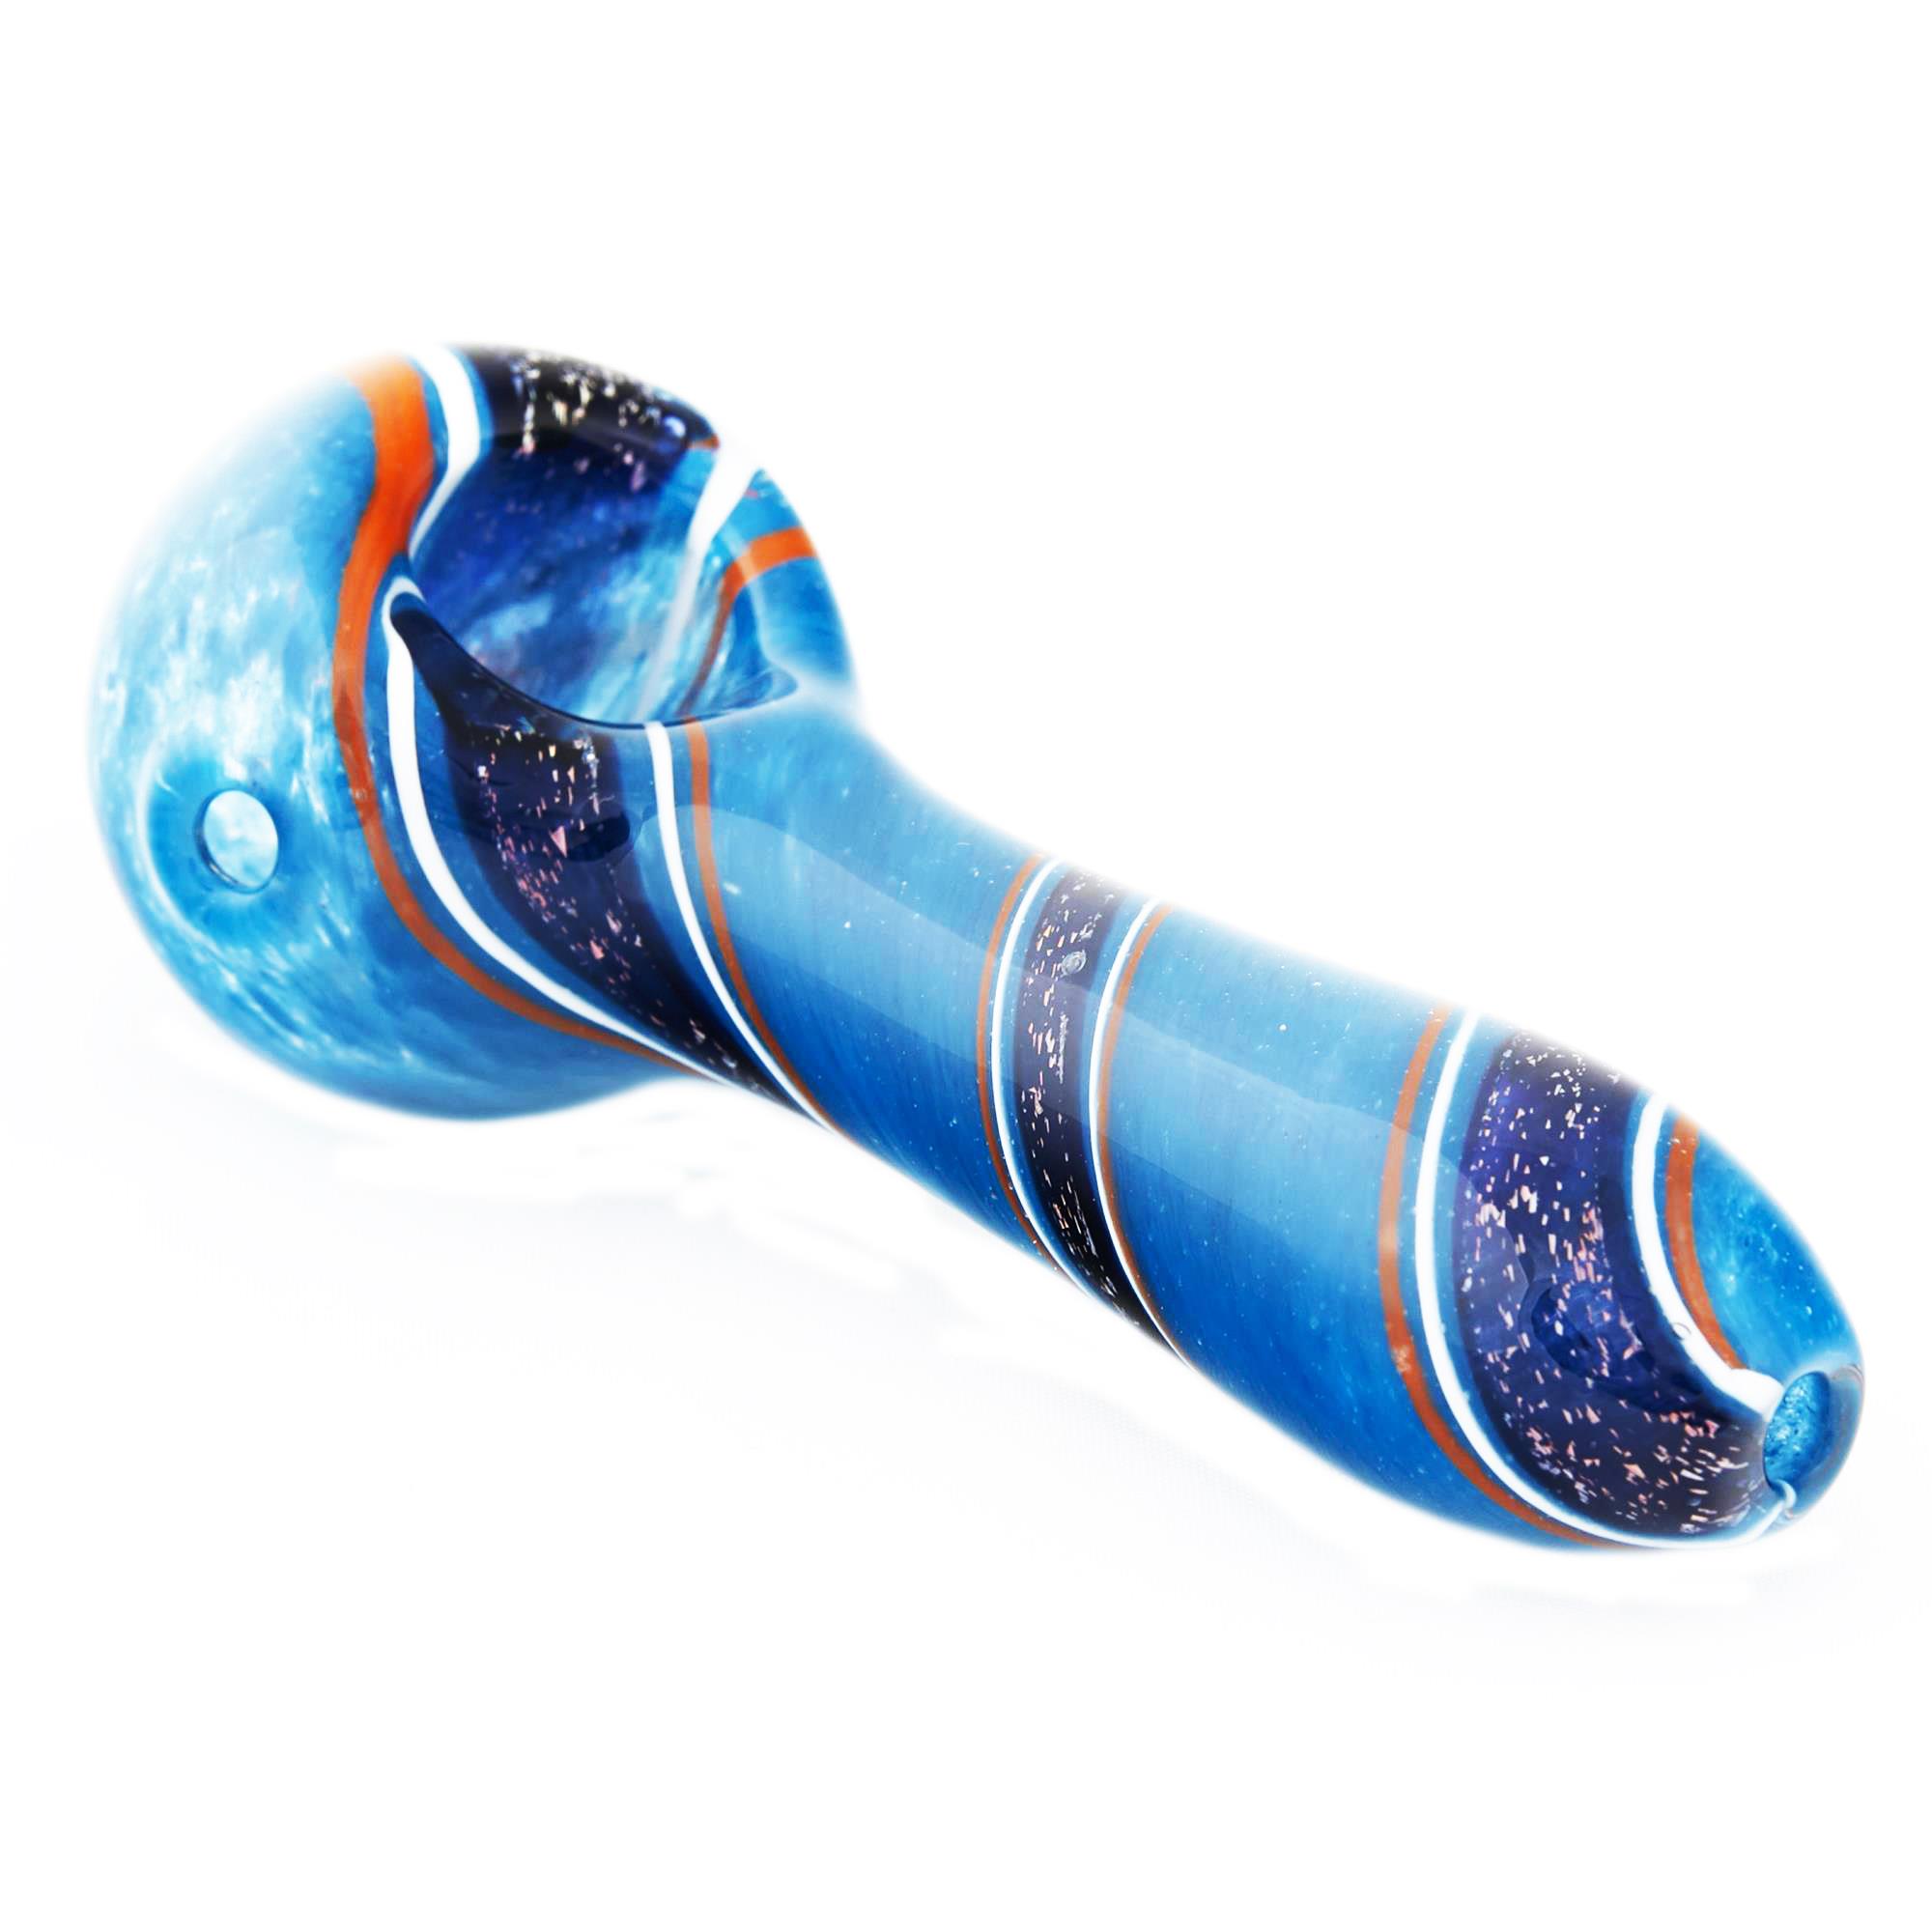 SWIRLY BABY SPOON PIPE